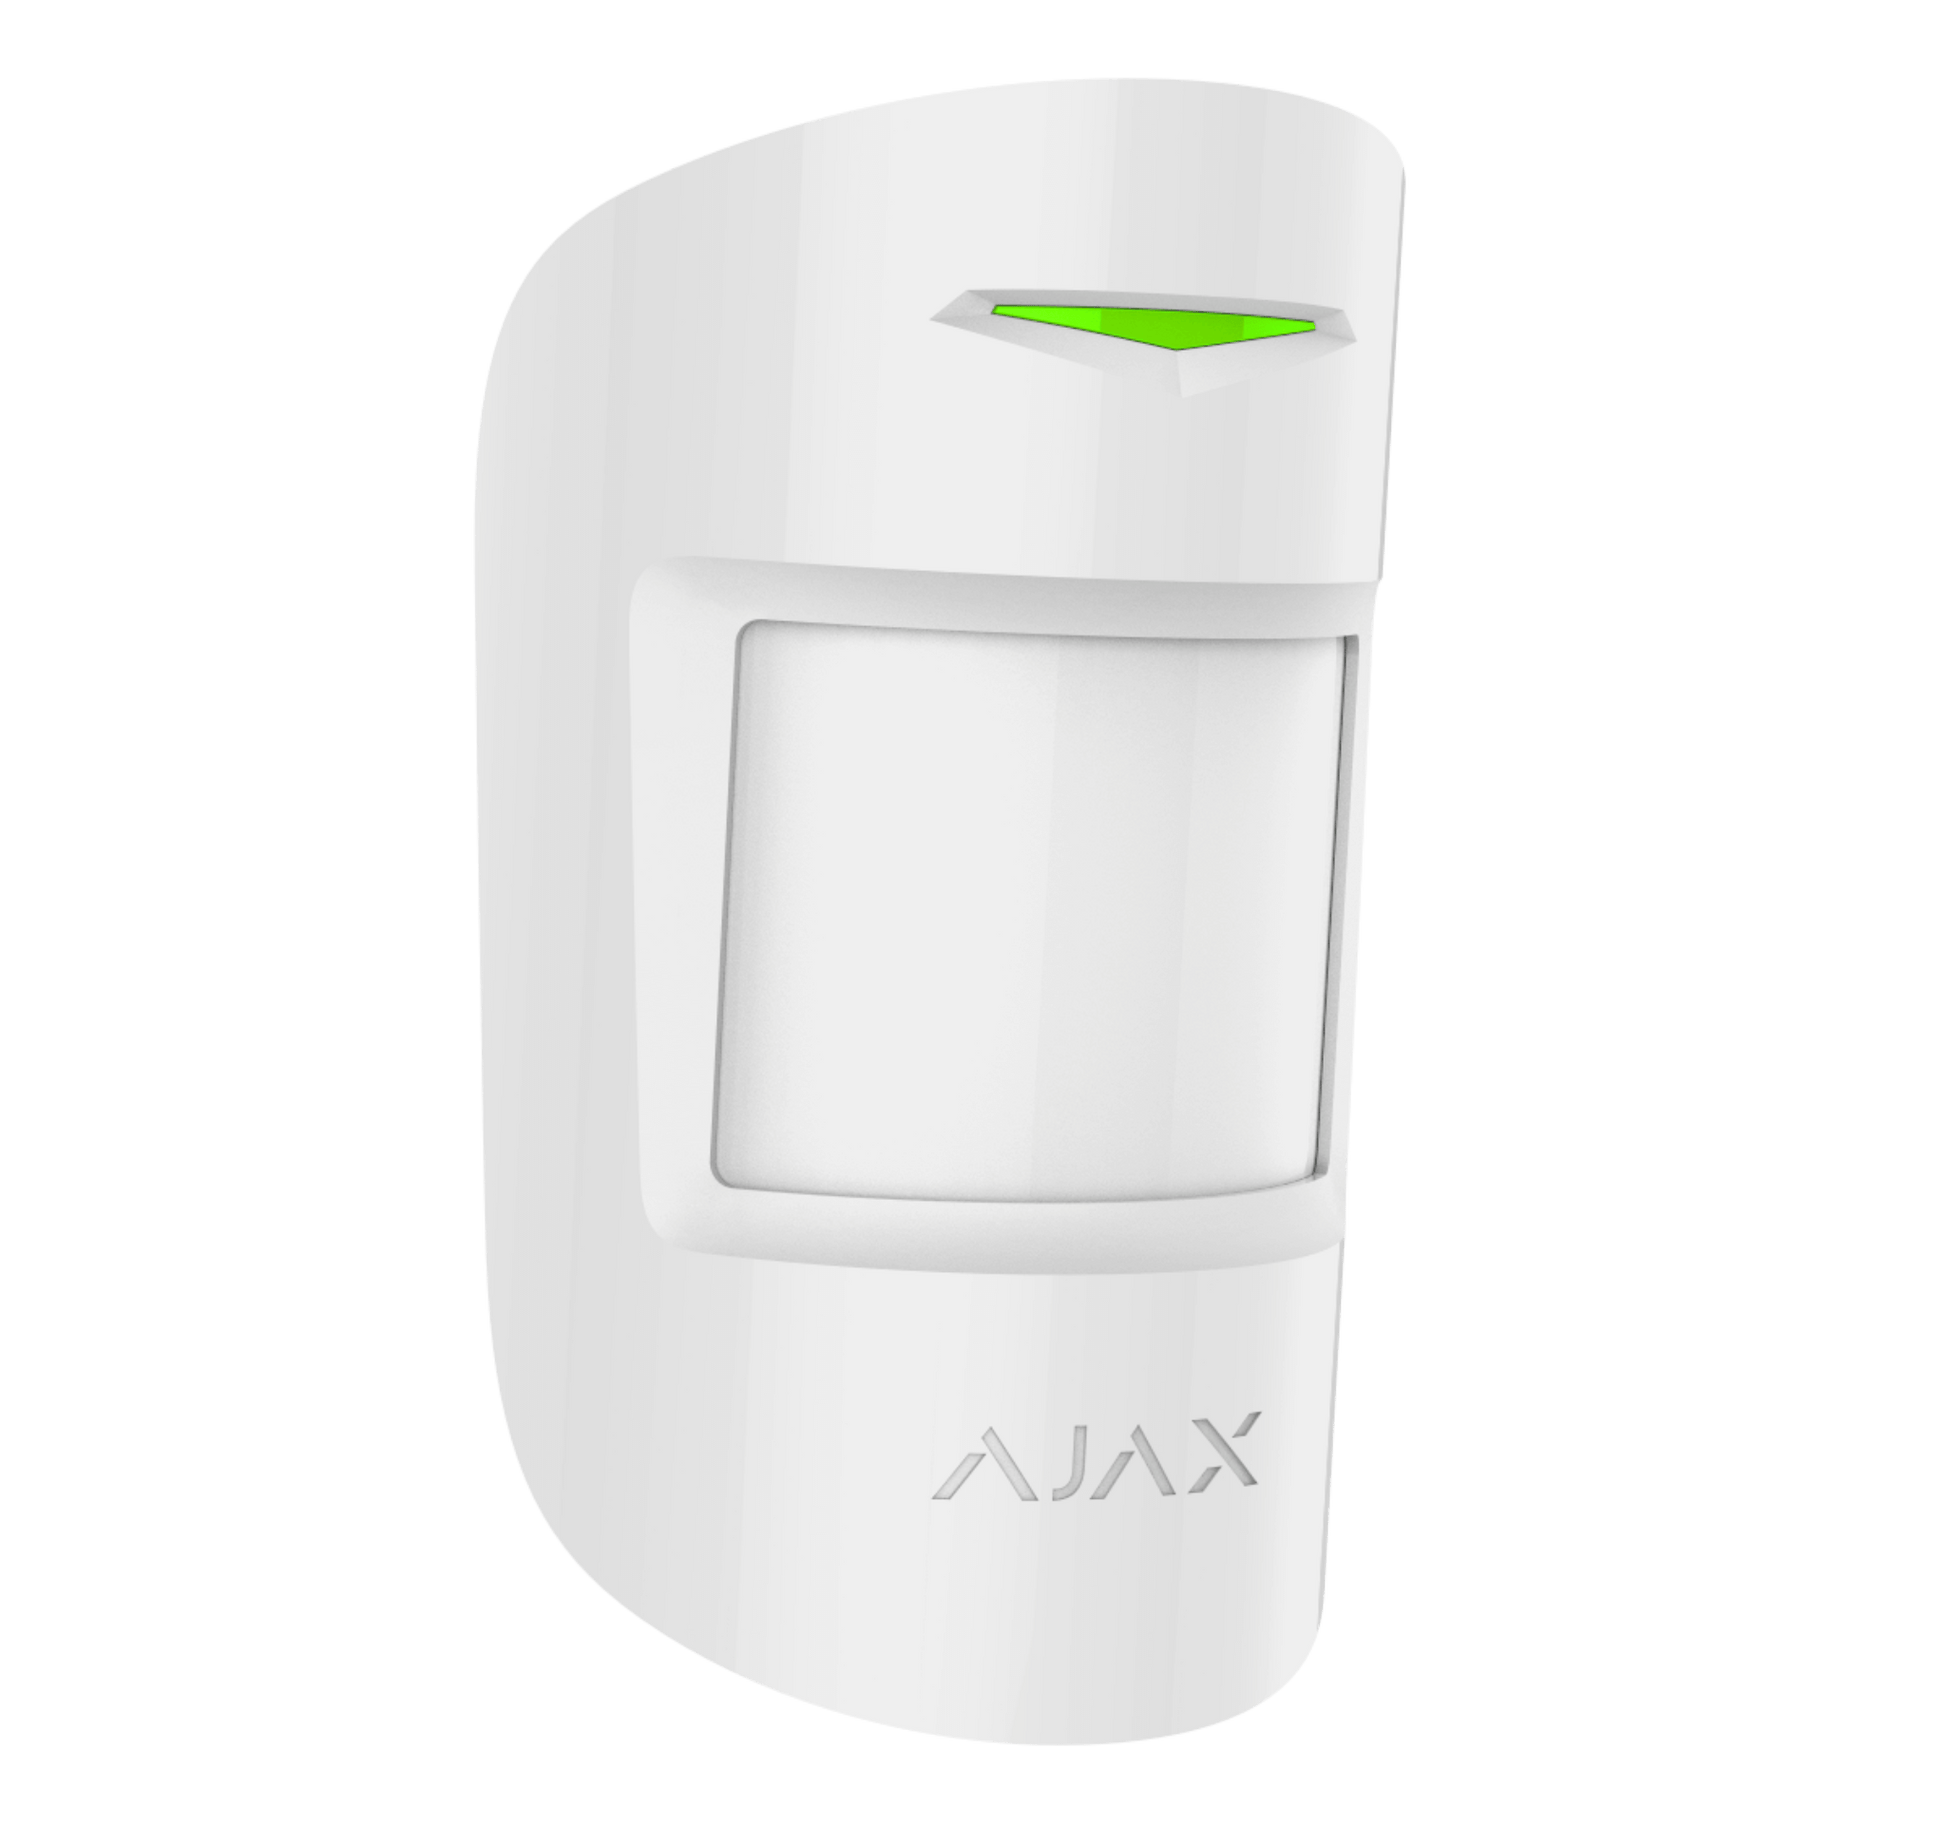 White Ajax MotionProtect plus from Ajax Security Systems, a wireless motion sensor for home and business security. Device is 110 × 65 × 50 mm in size, 96 grams in weight, this is the turned view of the device displayed in the image. buy Ajax security systems online , wireless driveway alarm.